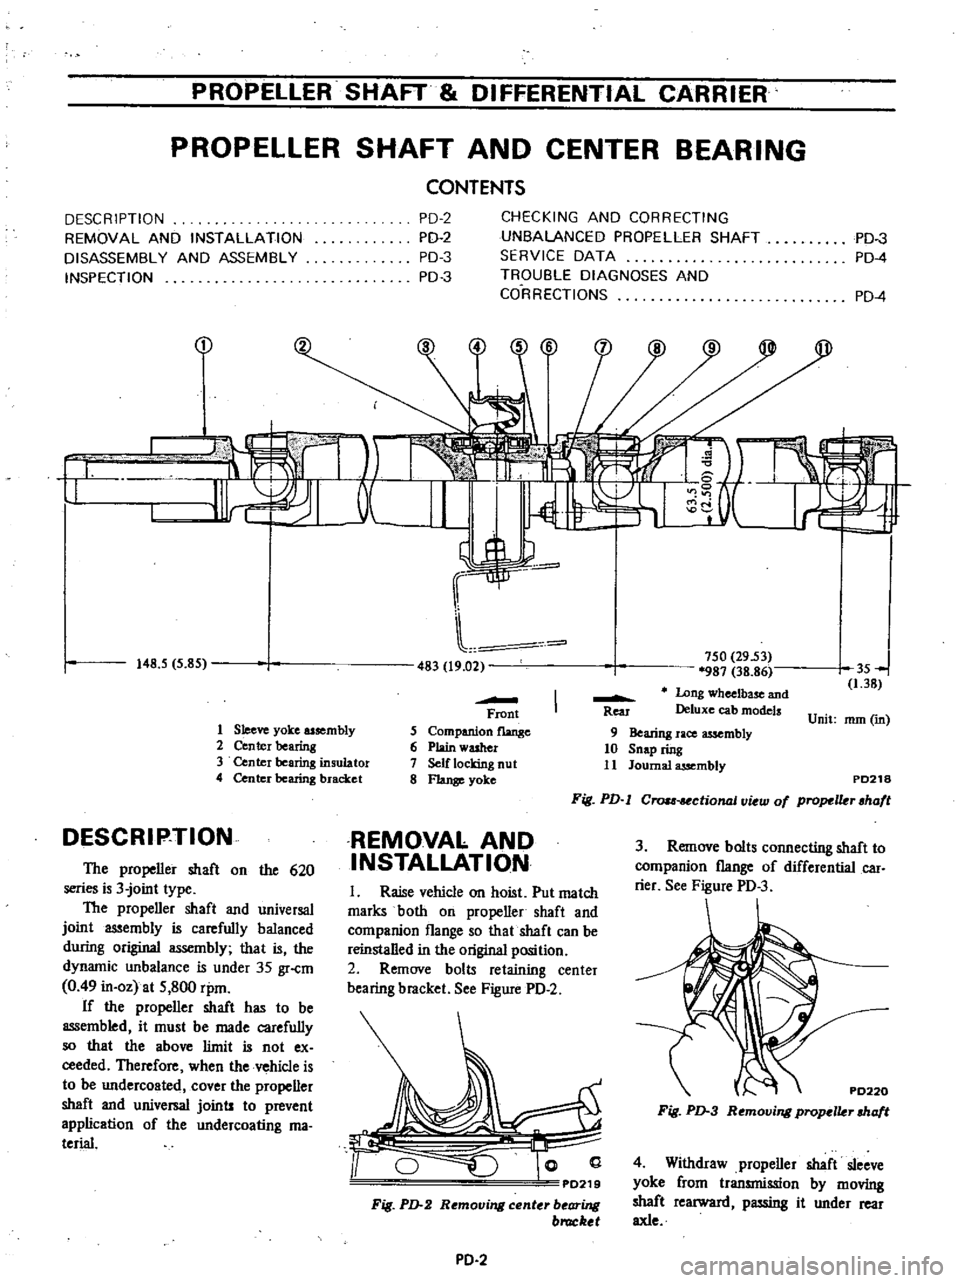 DATSUN PICK-UP 1977  Service Manual 
PROPElLER 
SHAFT 
DIFFERENTIAL

CARRIER

PROPELLER 
SHAFT

AND 
CENTER

BEARING

CONTENTS

DESCRIPTION

REMOVAL 
AND 
INSTALLATION

DISASSEMBLY 
AND 
ASSEMBLY

INSPECTION

i

t

I 
tl 
J

I

O

148 
